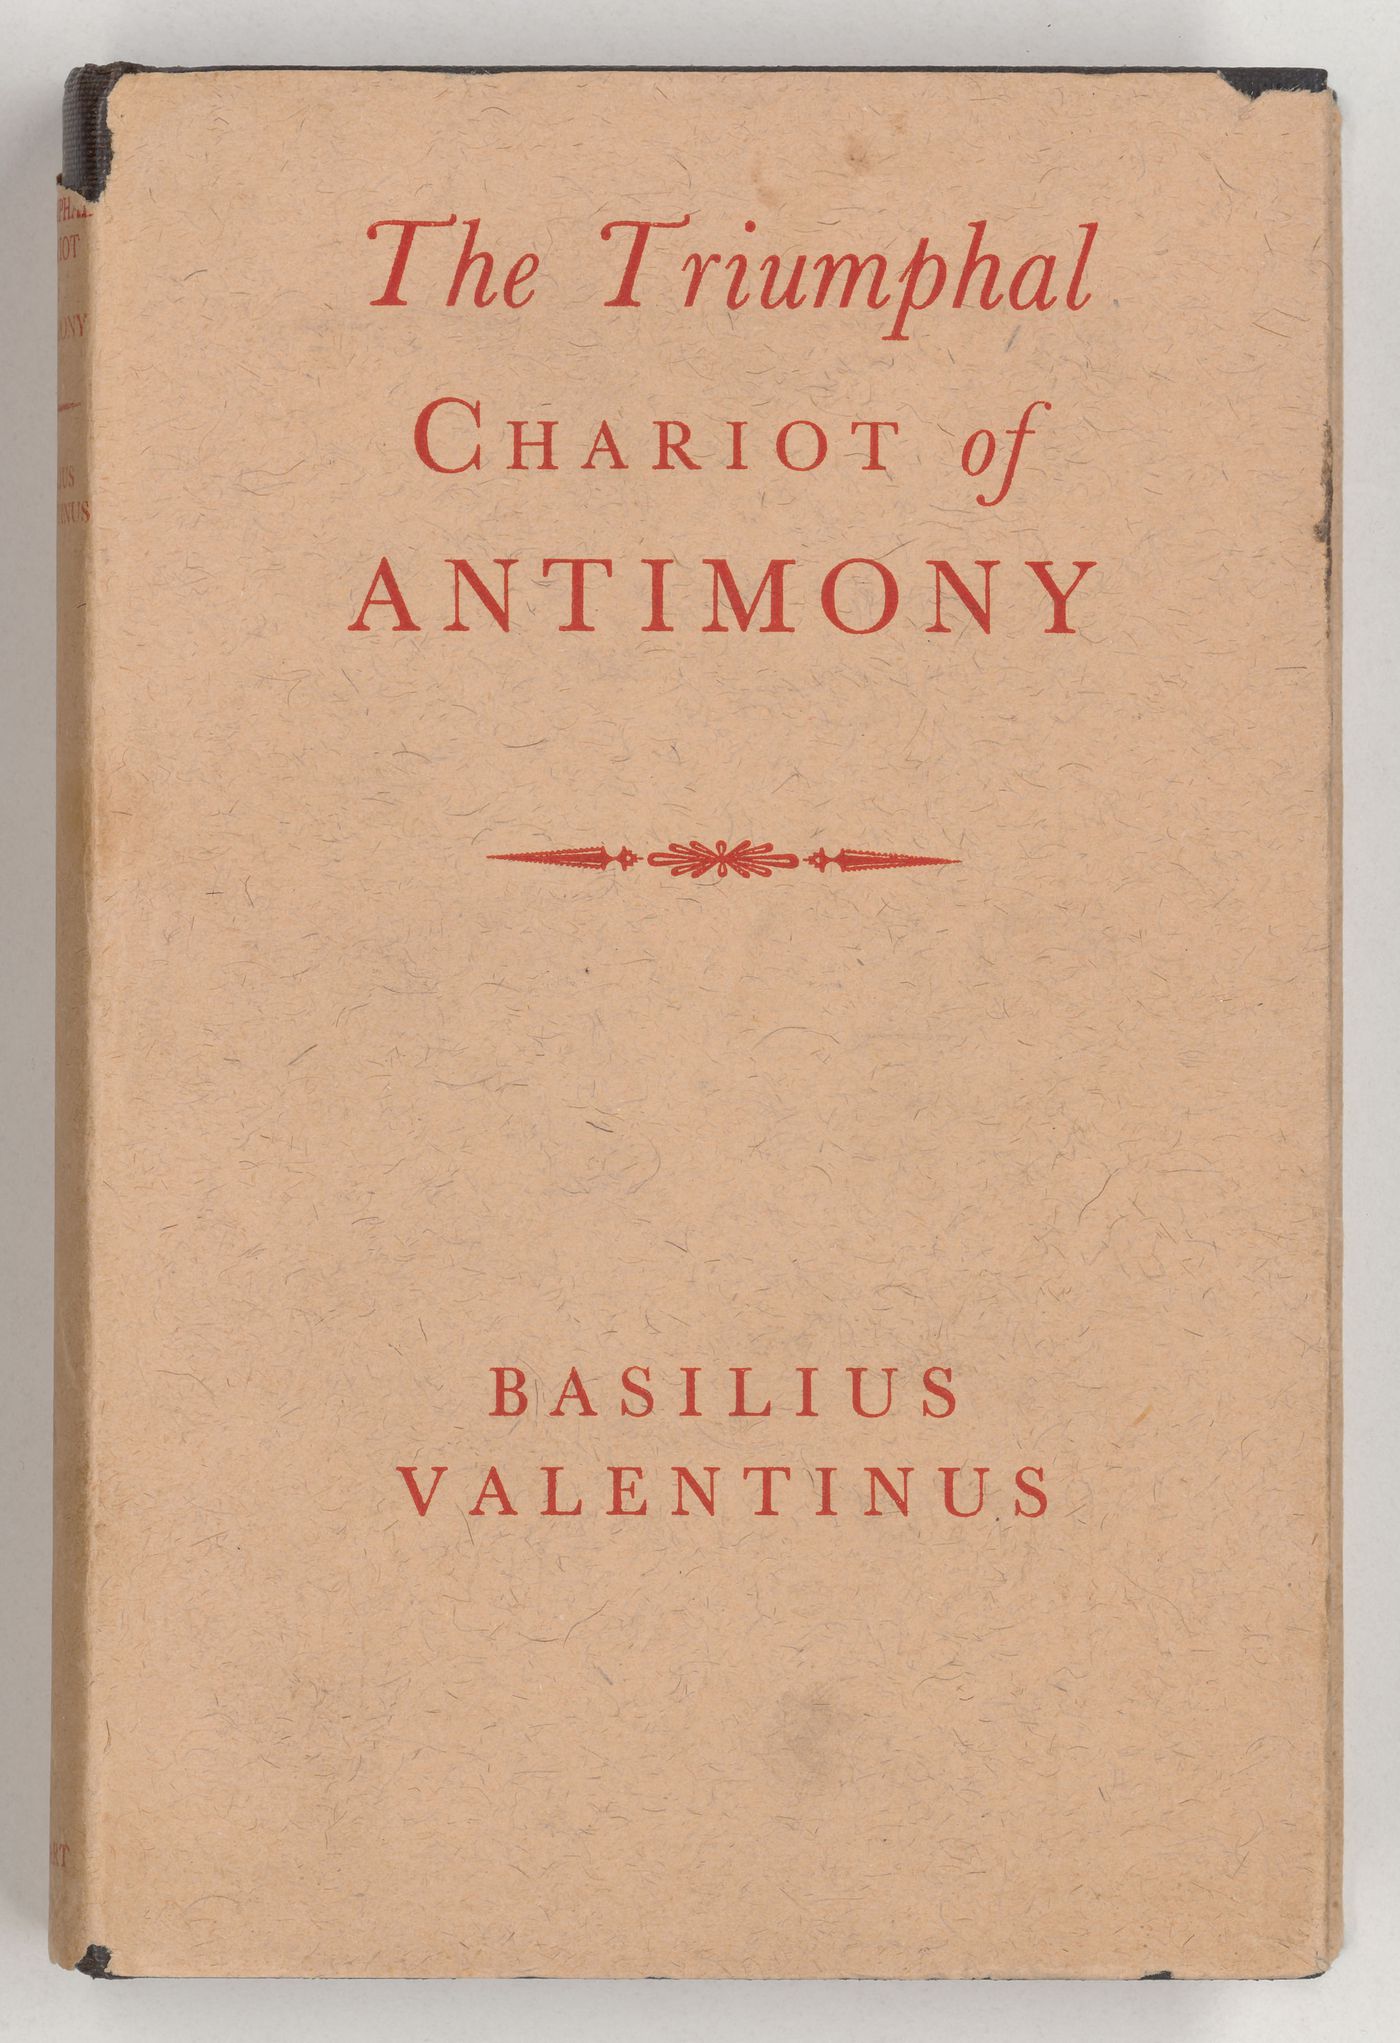 The Triumphal Chariot of Antimony